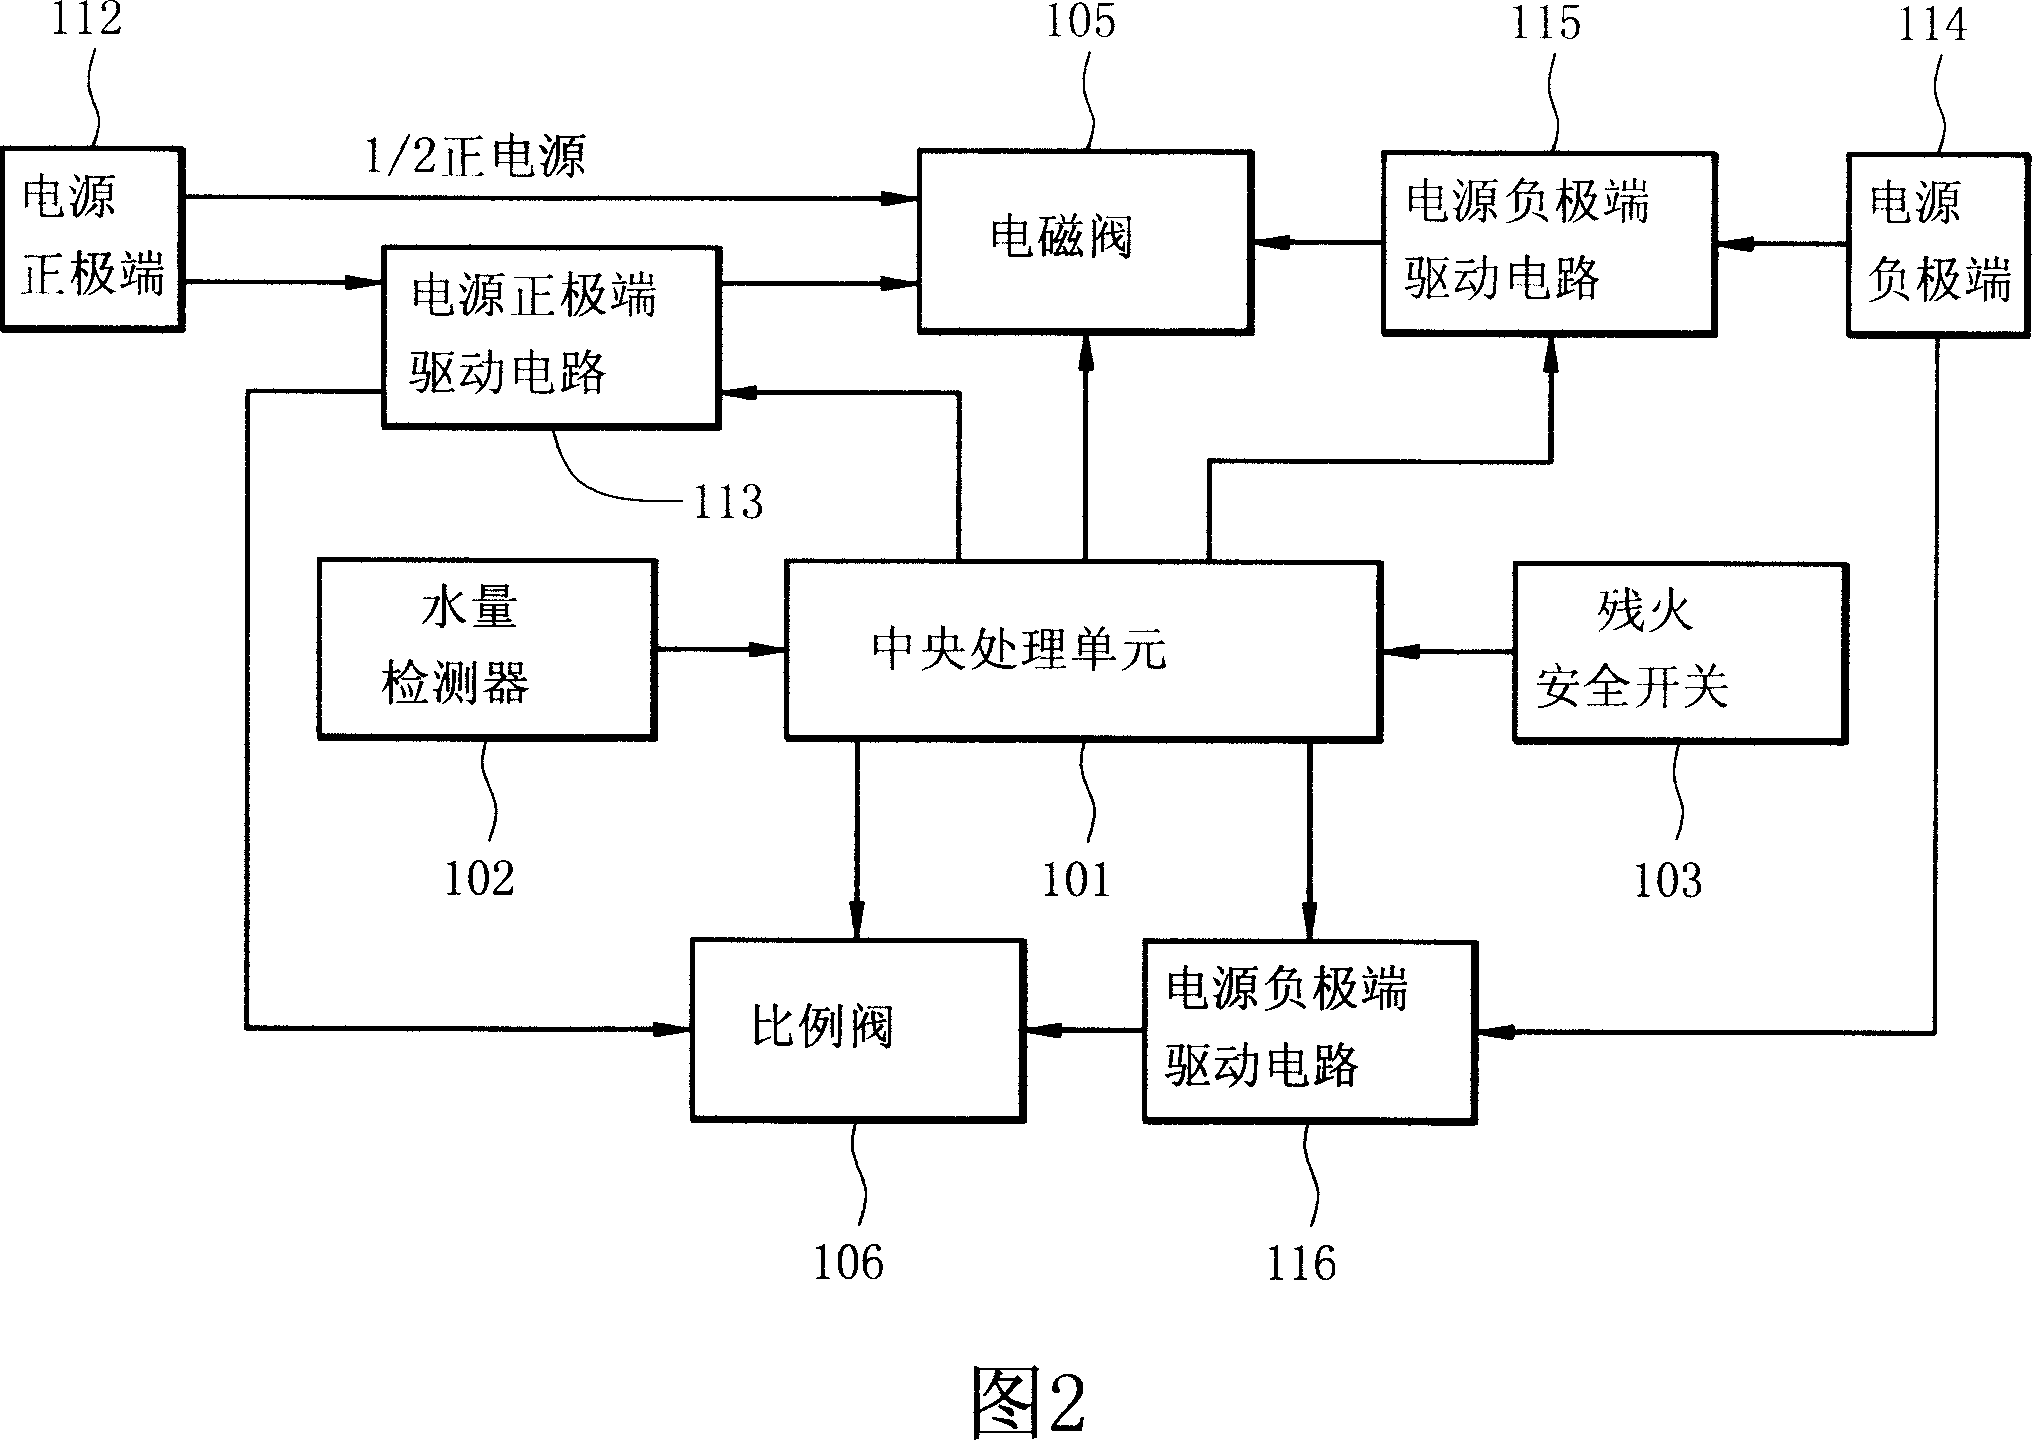 Electromagnetic valve control circuit and electromagnetic valve control method for water heater